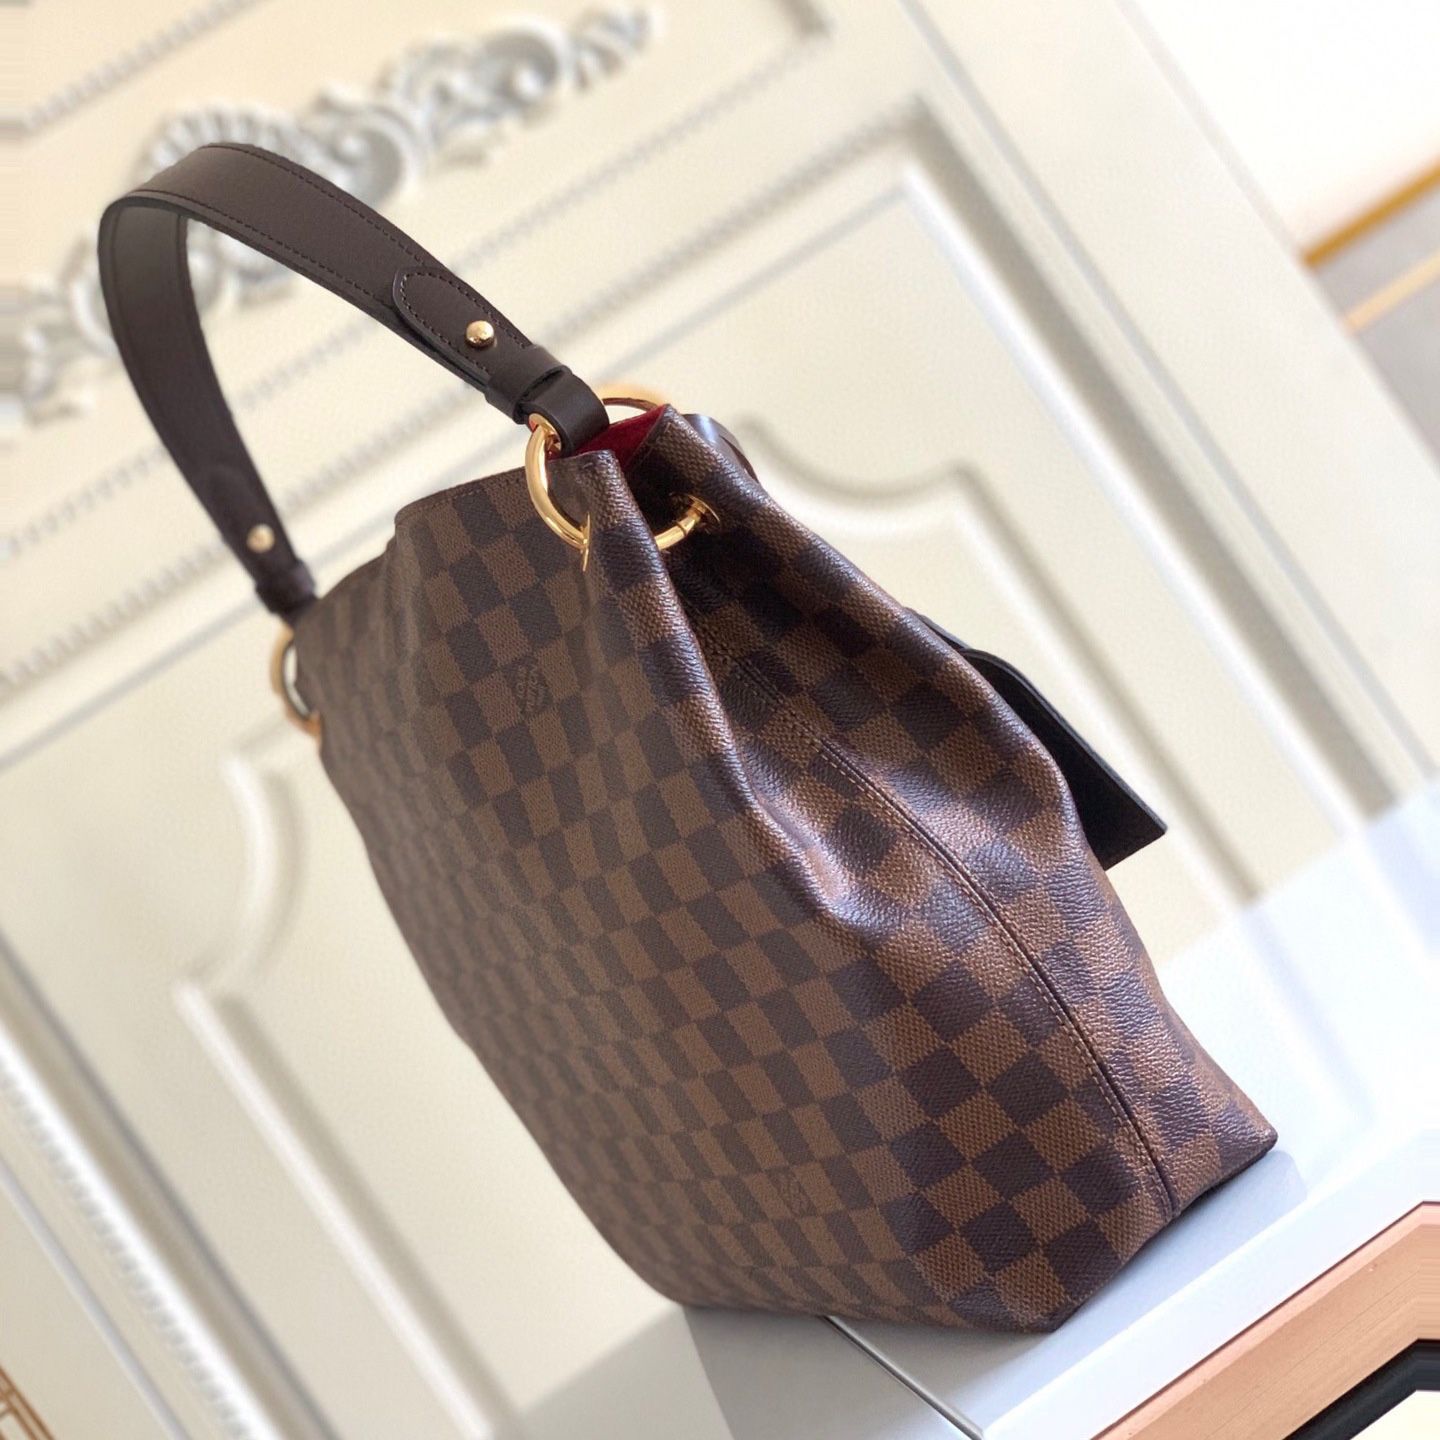 Grab Classic And Timeless Louis Vuitton Items At Up To 20% Off - SHEfinds